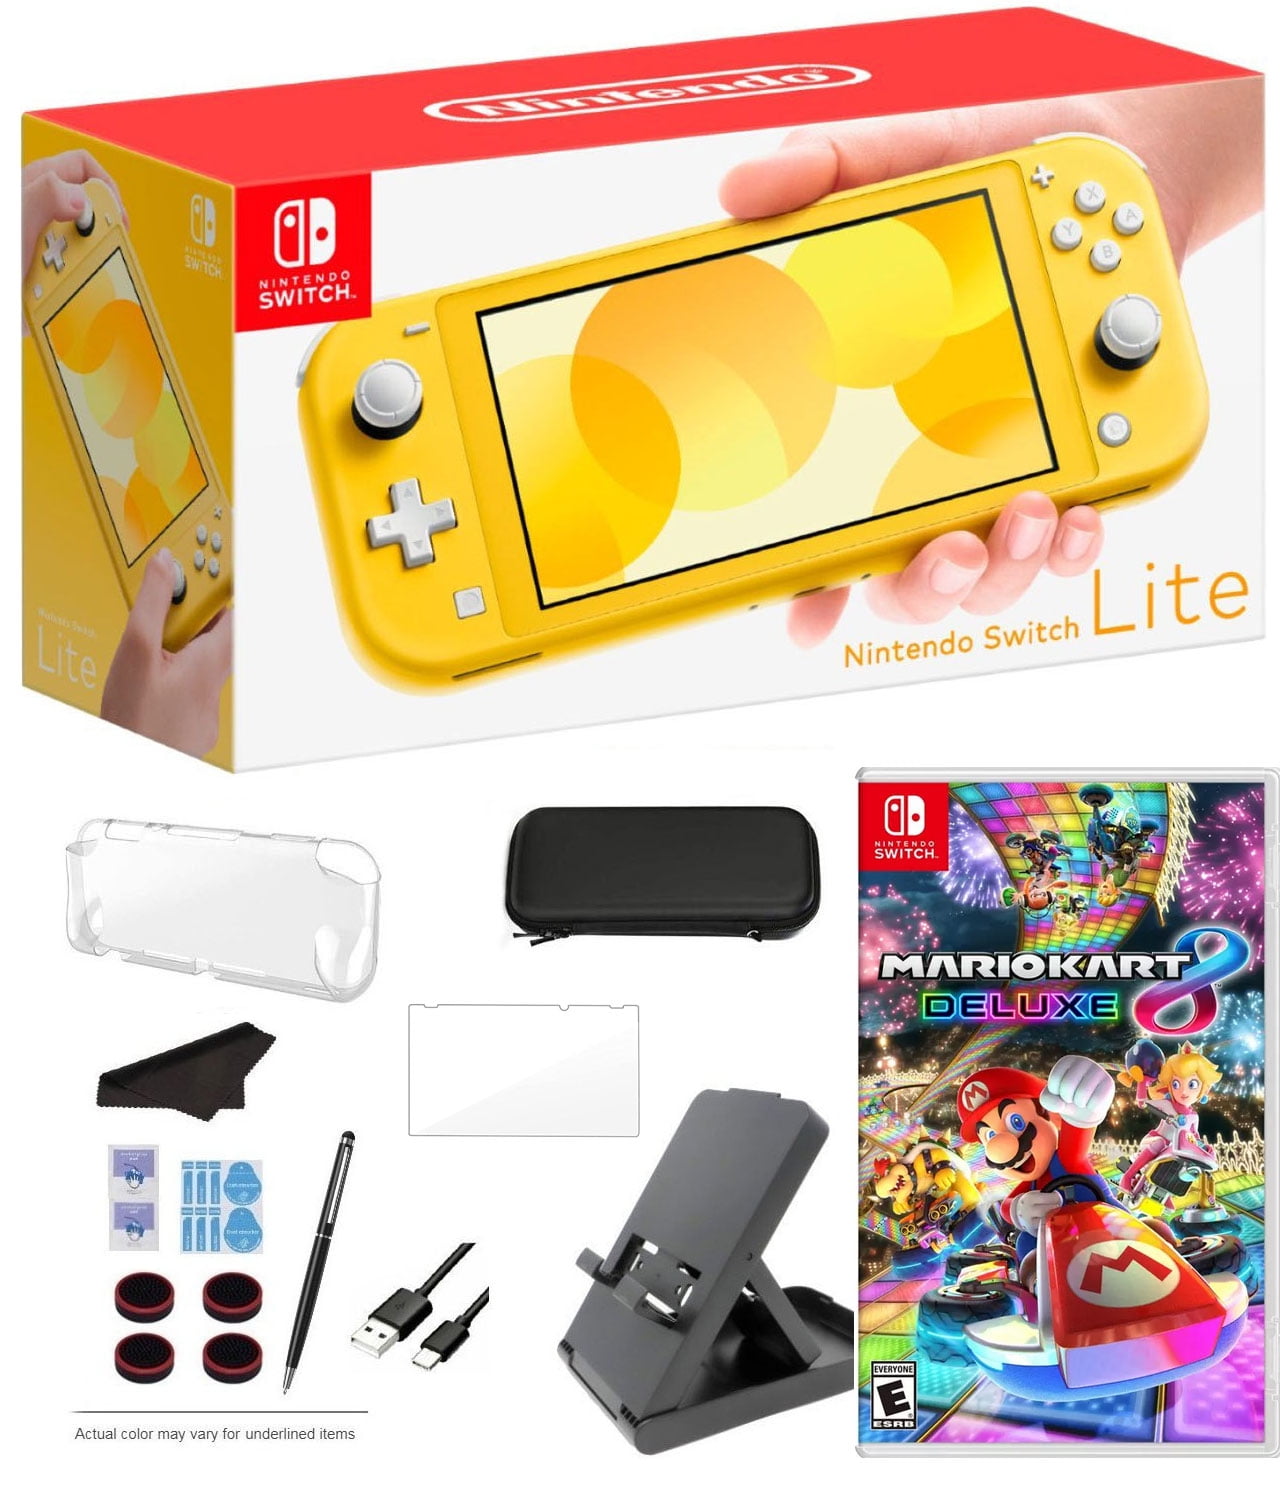 Nintendo Switch Lite Console, Turquoise,5.5” LCD Touch 1280x720 